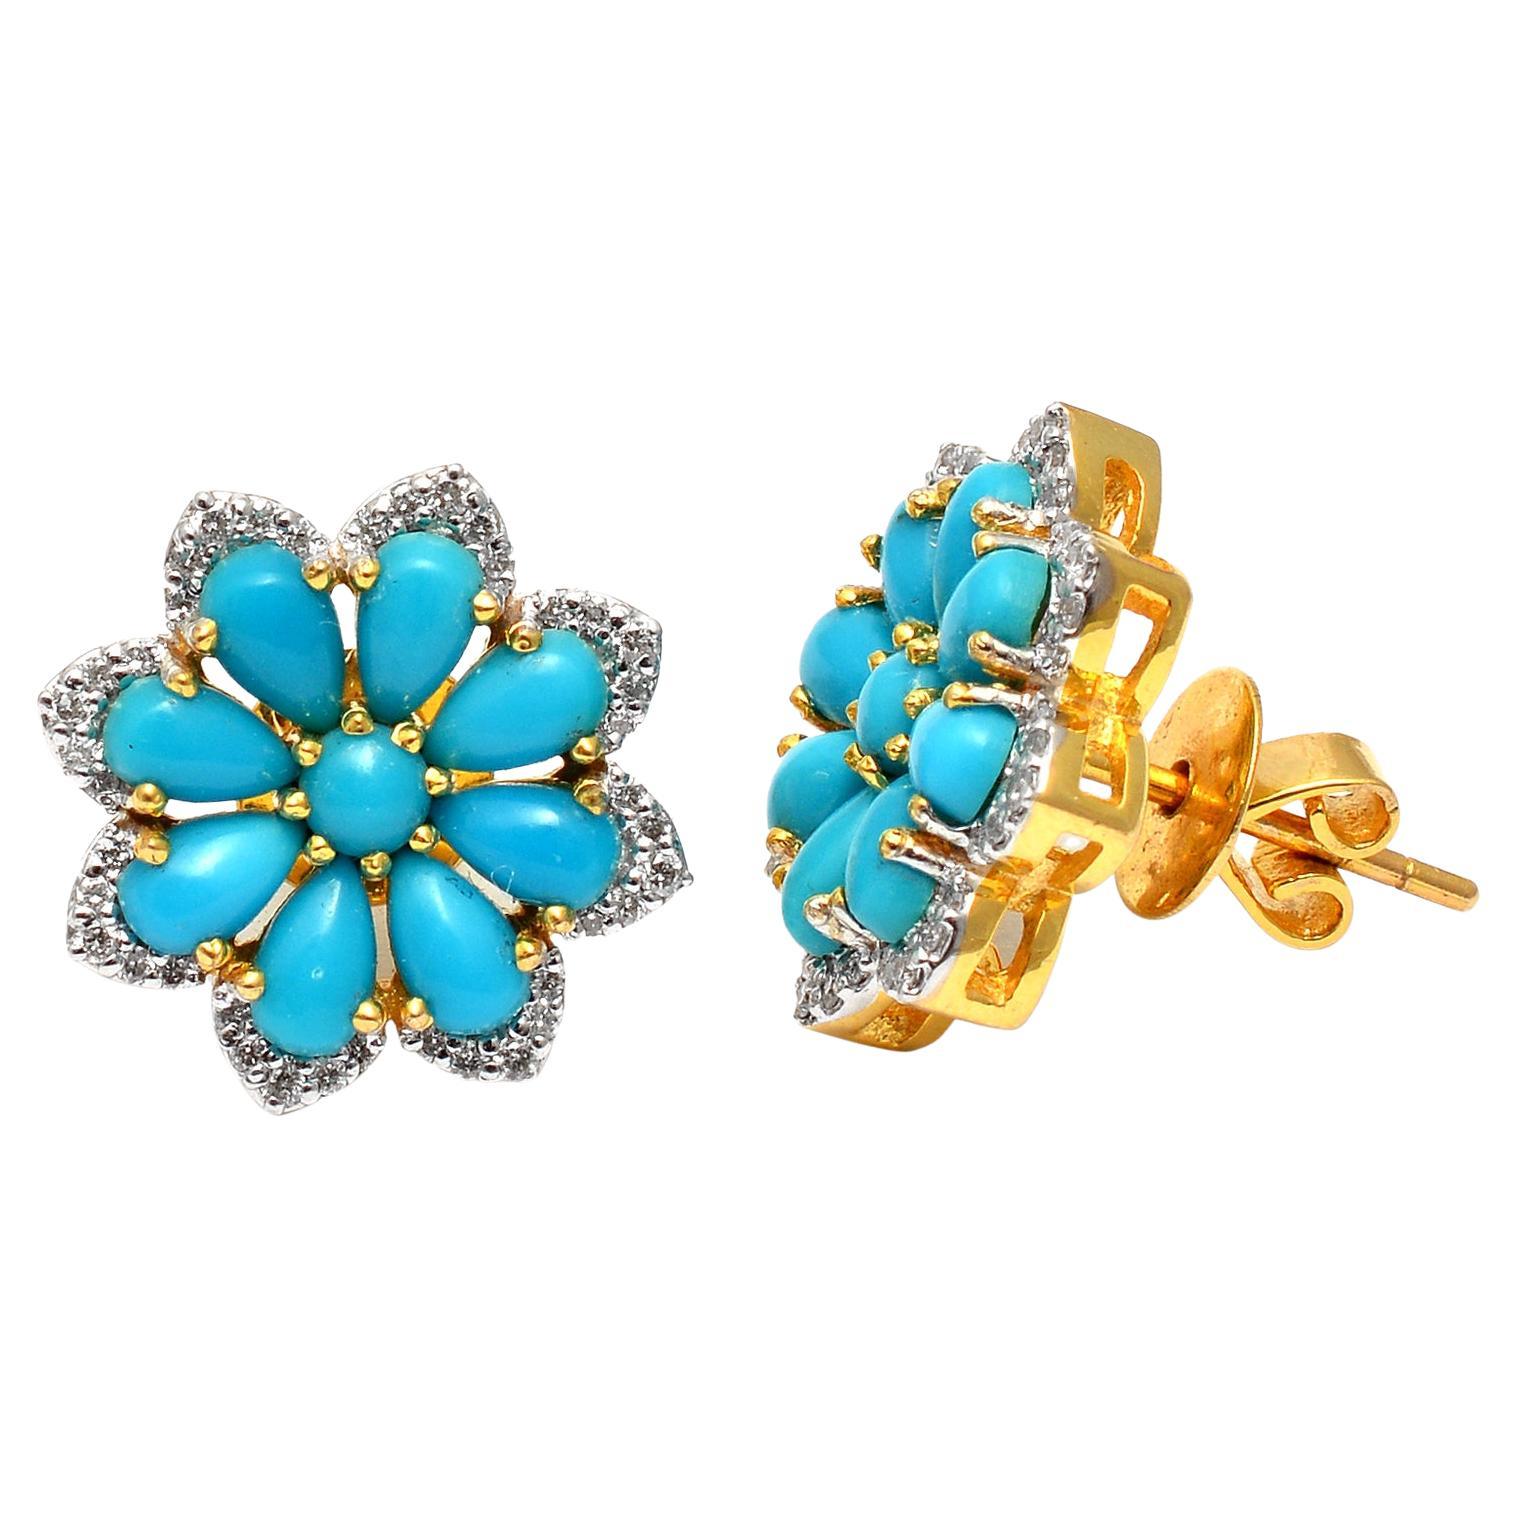 Turquoise Stud Earrings with Diamond in 14k Gold For Sale at 1stDibs